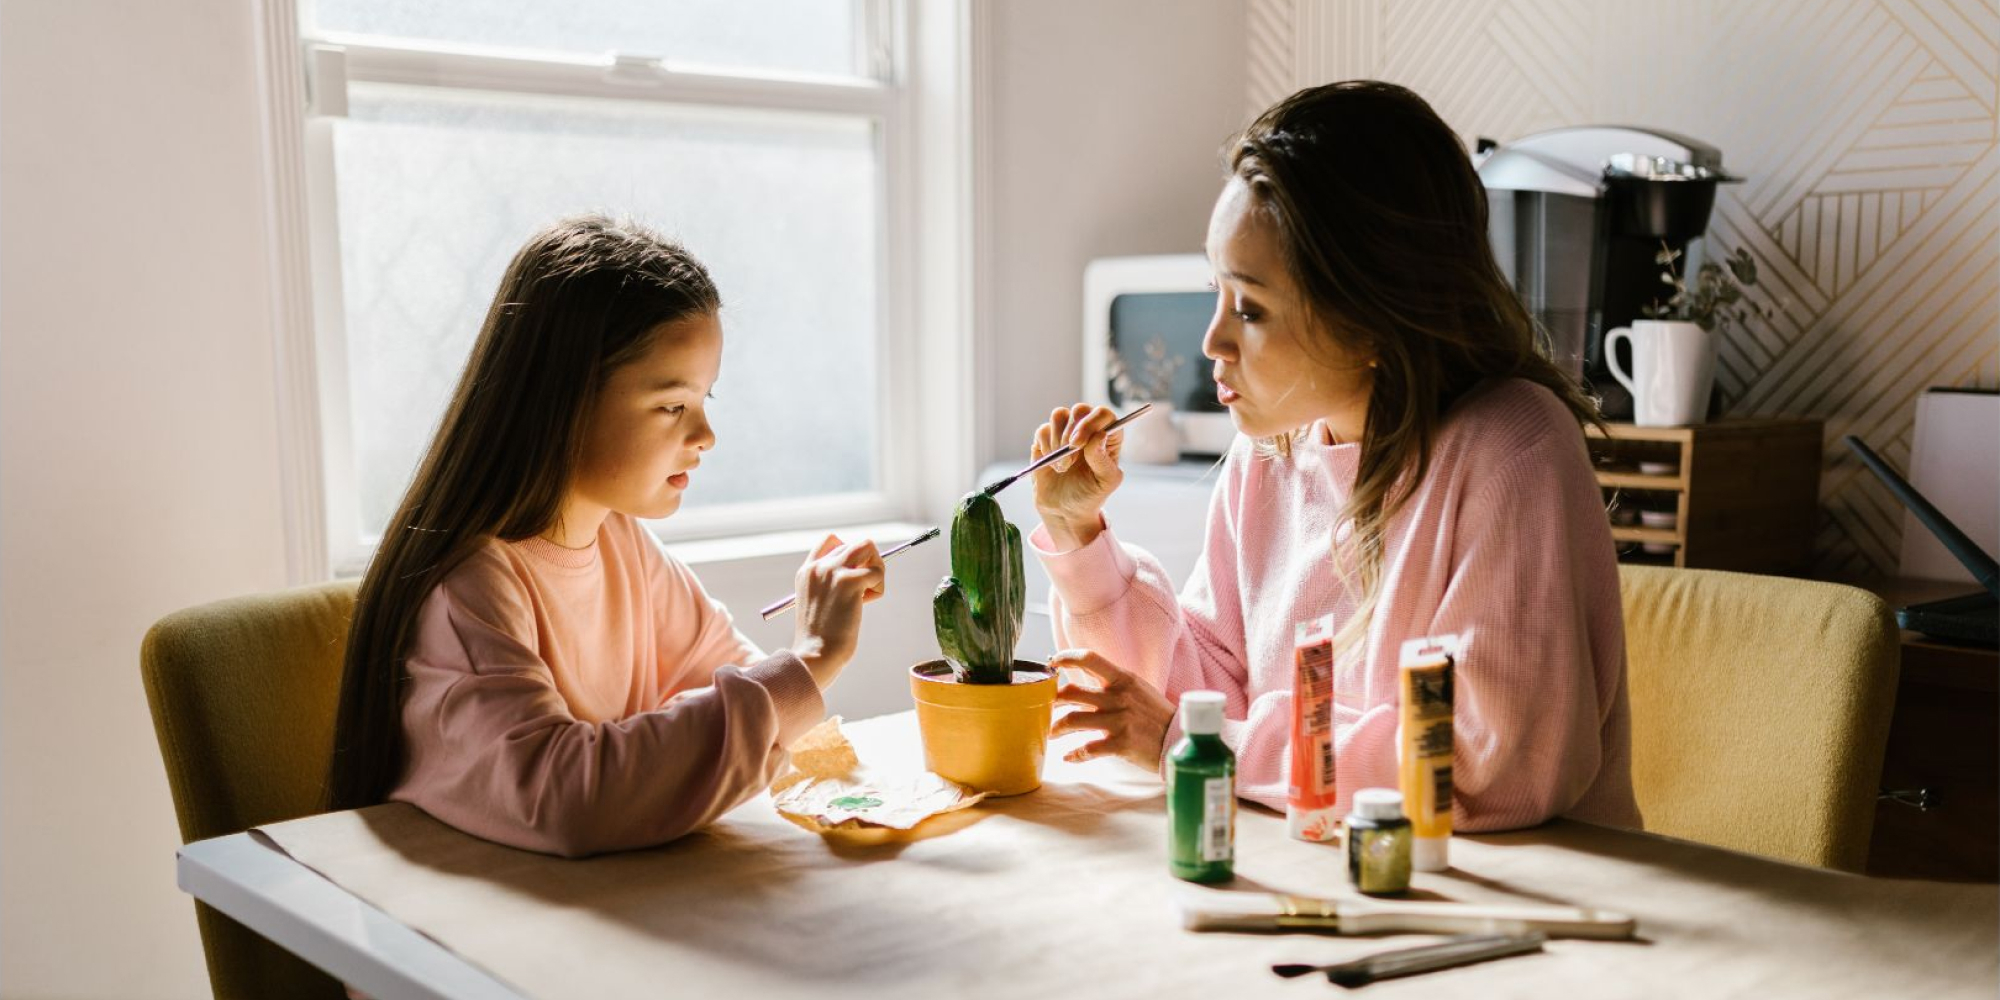 A mother and daughter painting a ceramic cactus.